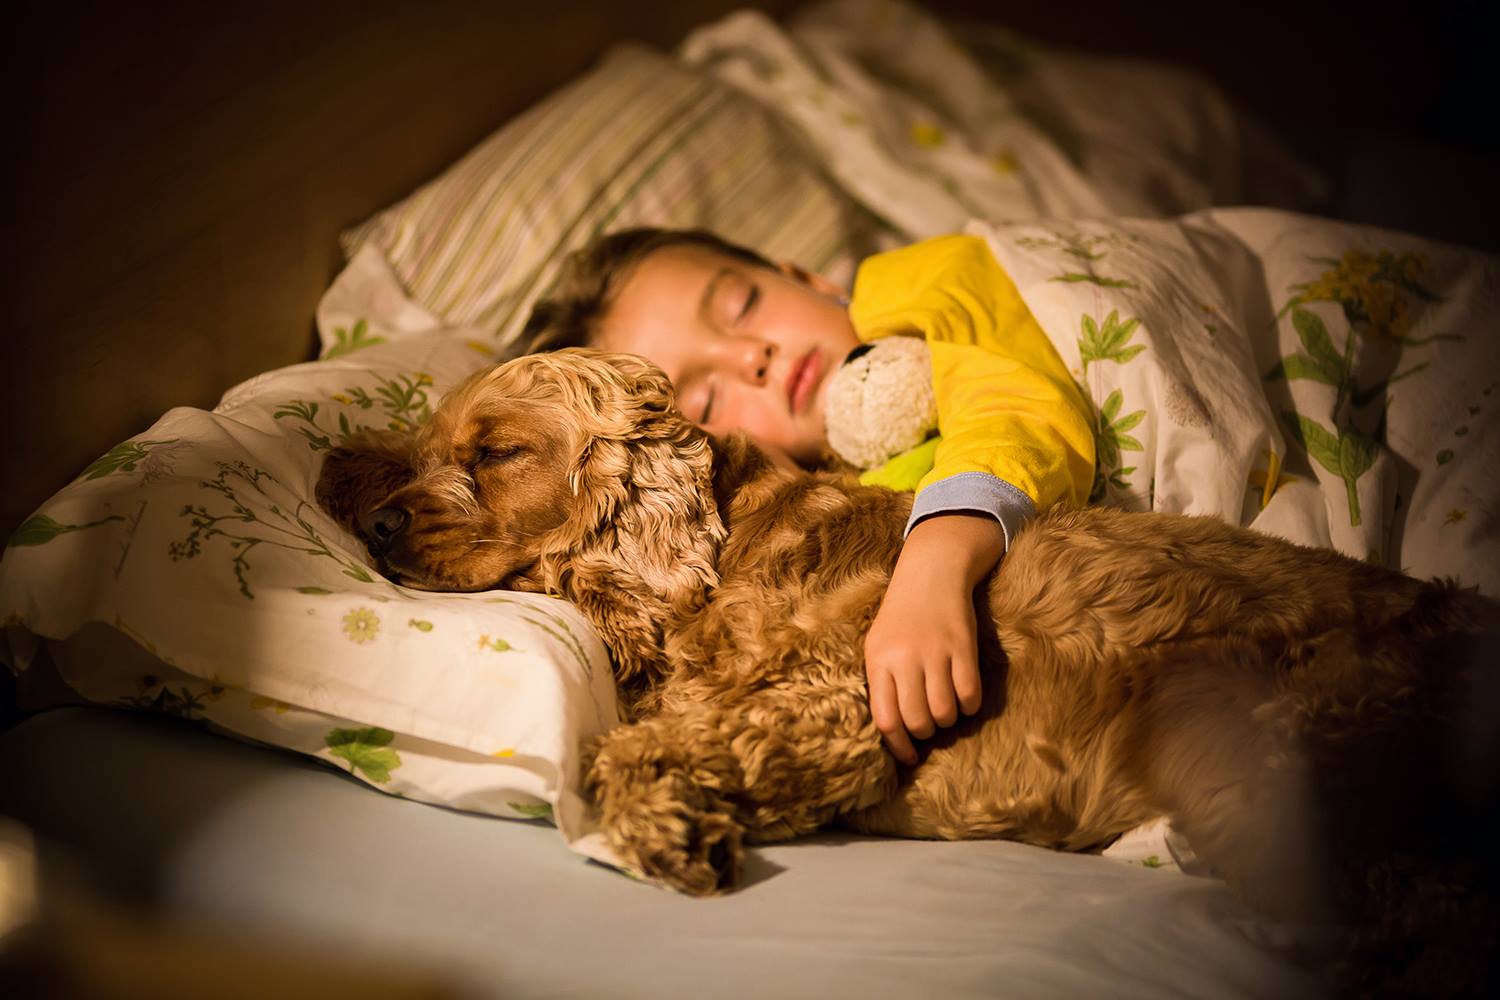 A Cocker Spaniel sleeping on the bed with a kid hugging him from behind